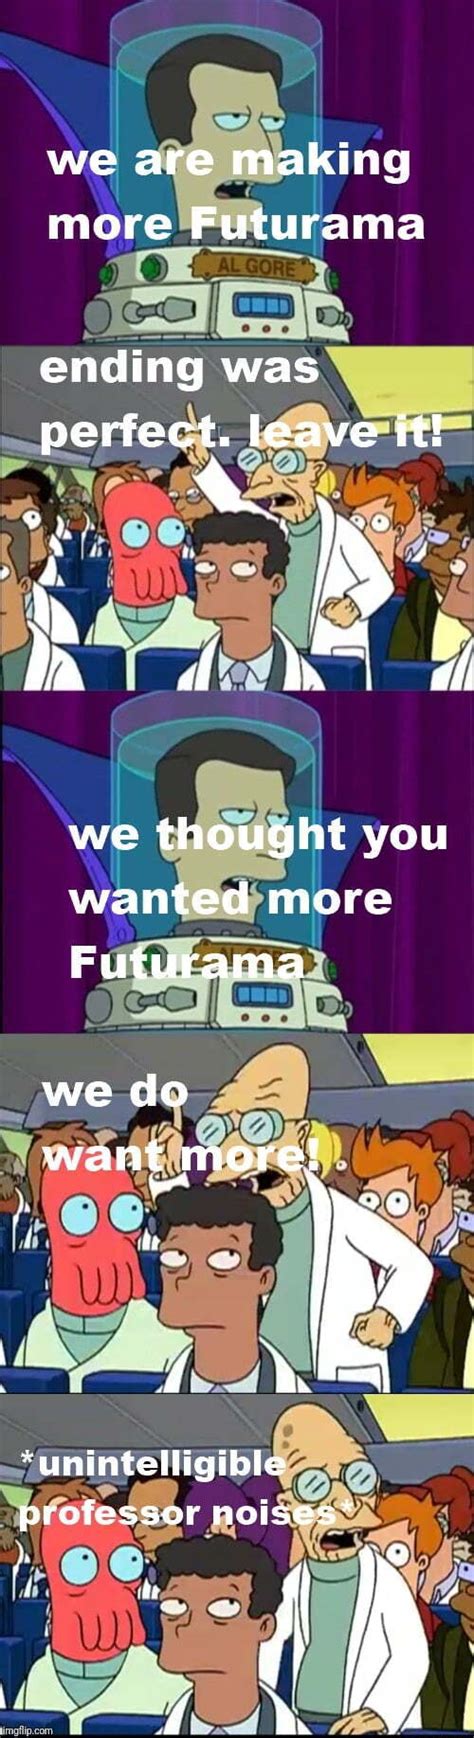 We Are Making More Futurama Ending Was Perfect Leave It 9 Ho 4 Te We